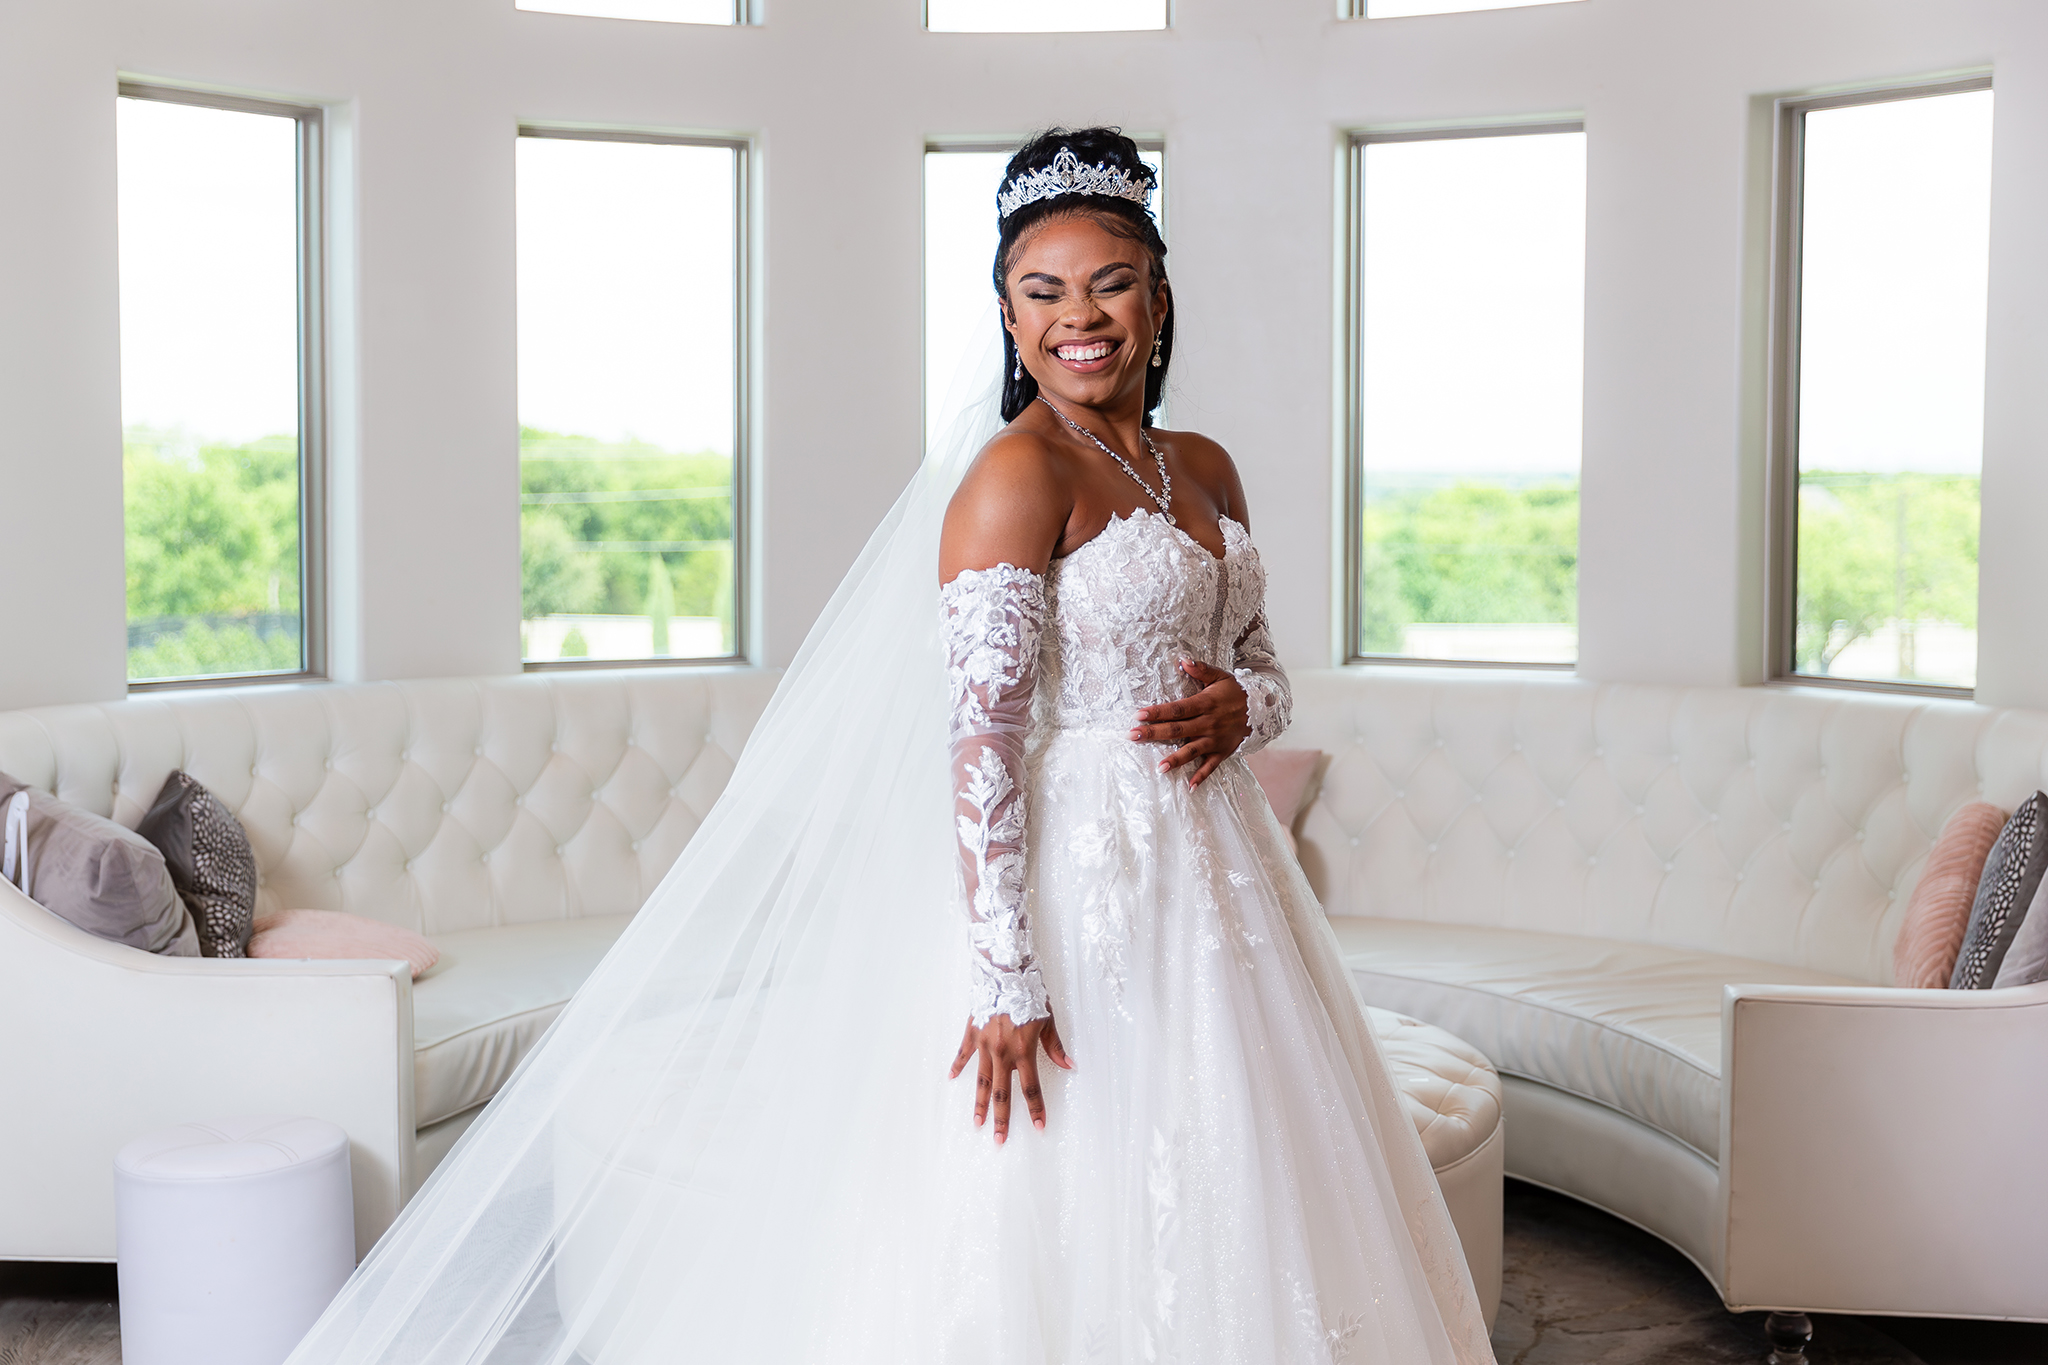 Bride laughing in bridal suite at Knotting Hill Place captured by Stefani Ciotti Photography